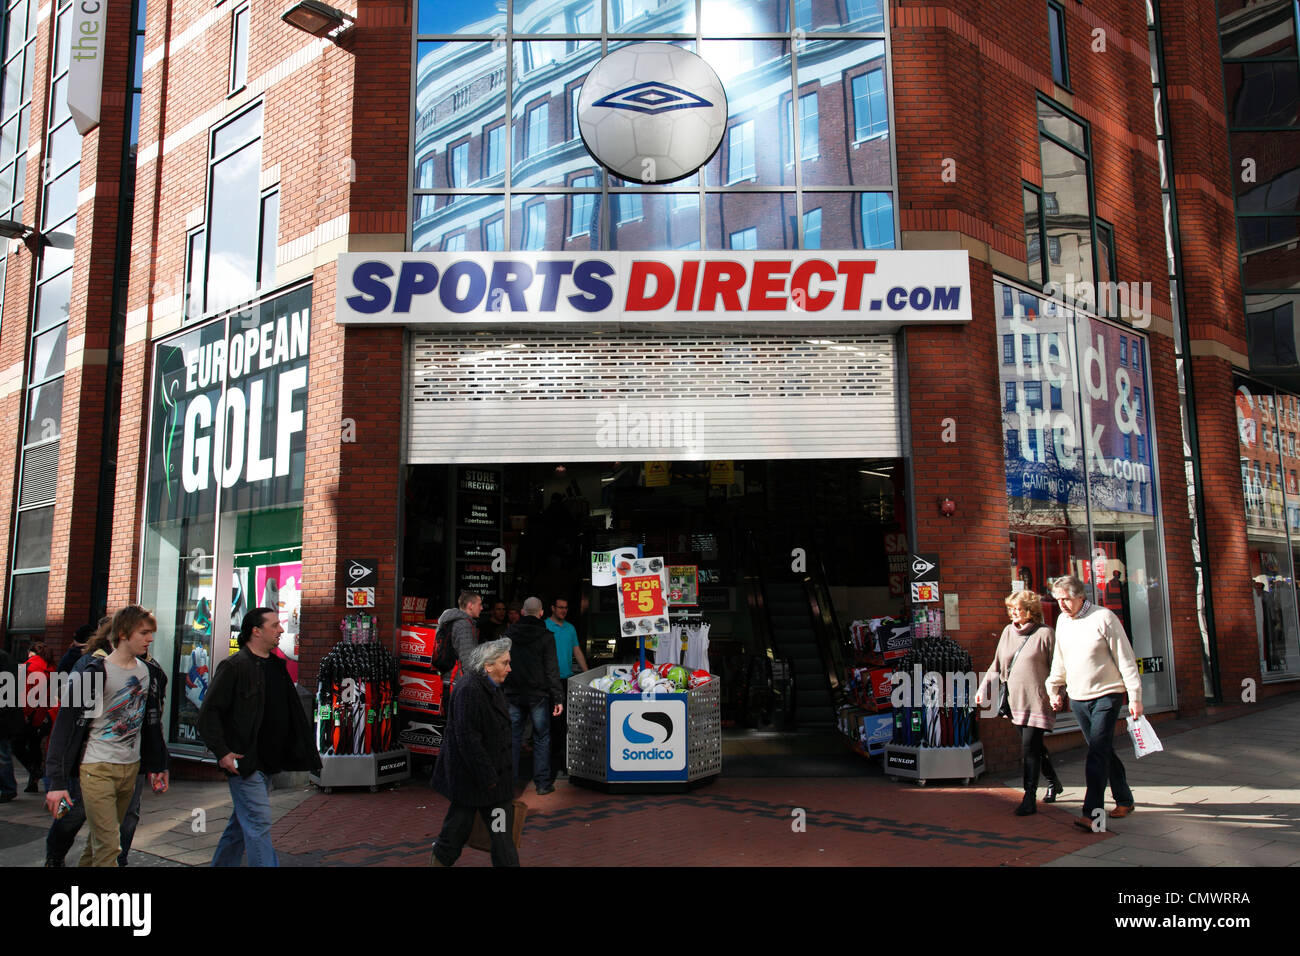 the New GAME store inside sports direct Birmingham New street let's check  it out brand new opening 